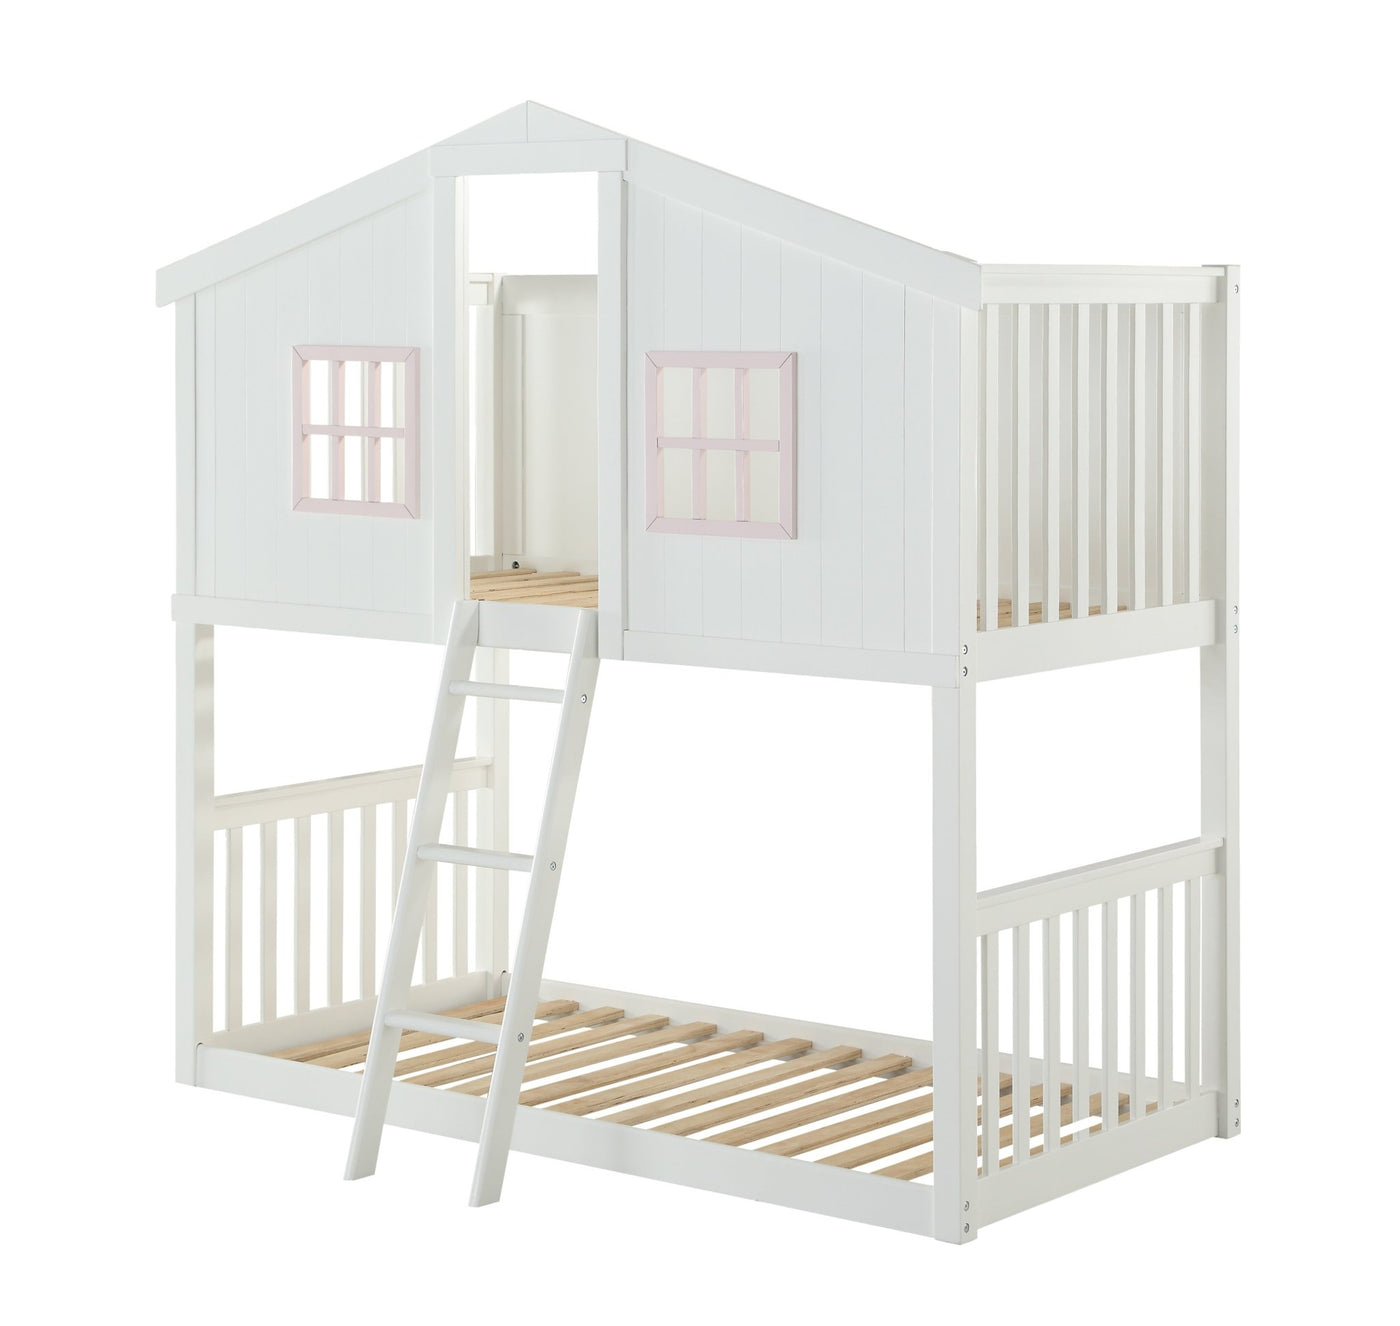 Rohan Cottage Twin/Twin Bunk Bed